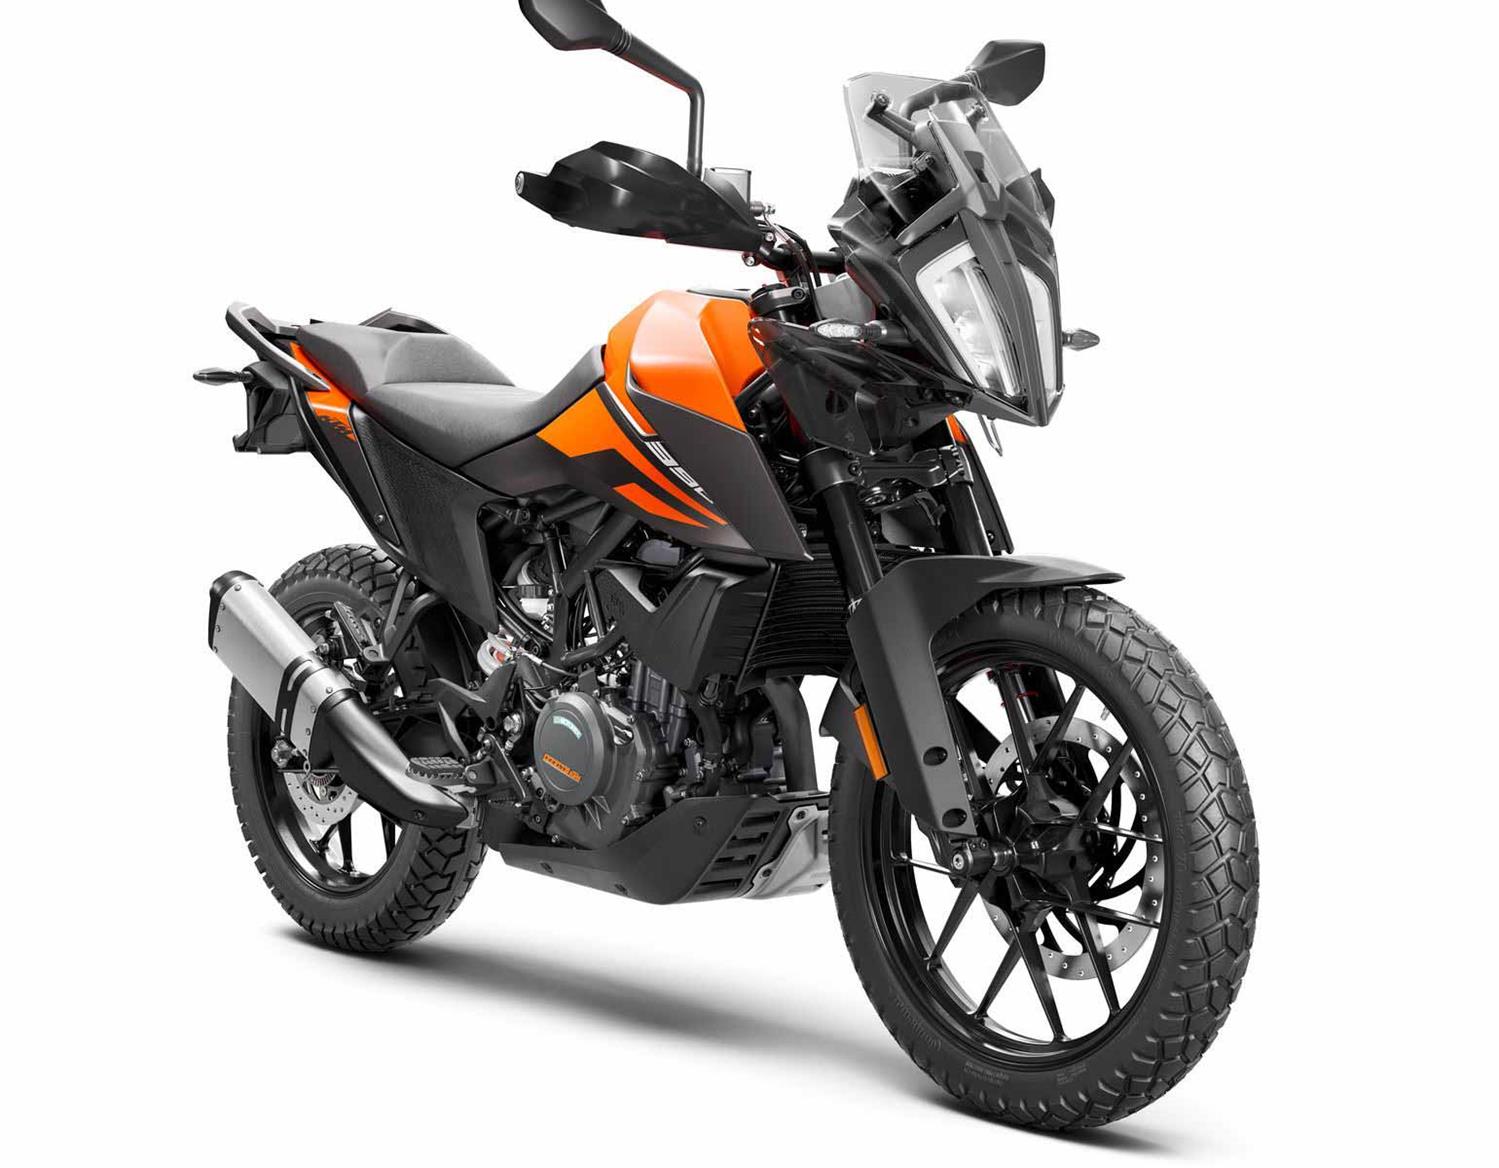 KTM’s new 390 Adventure welcomes riders to the dirty side